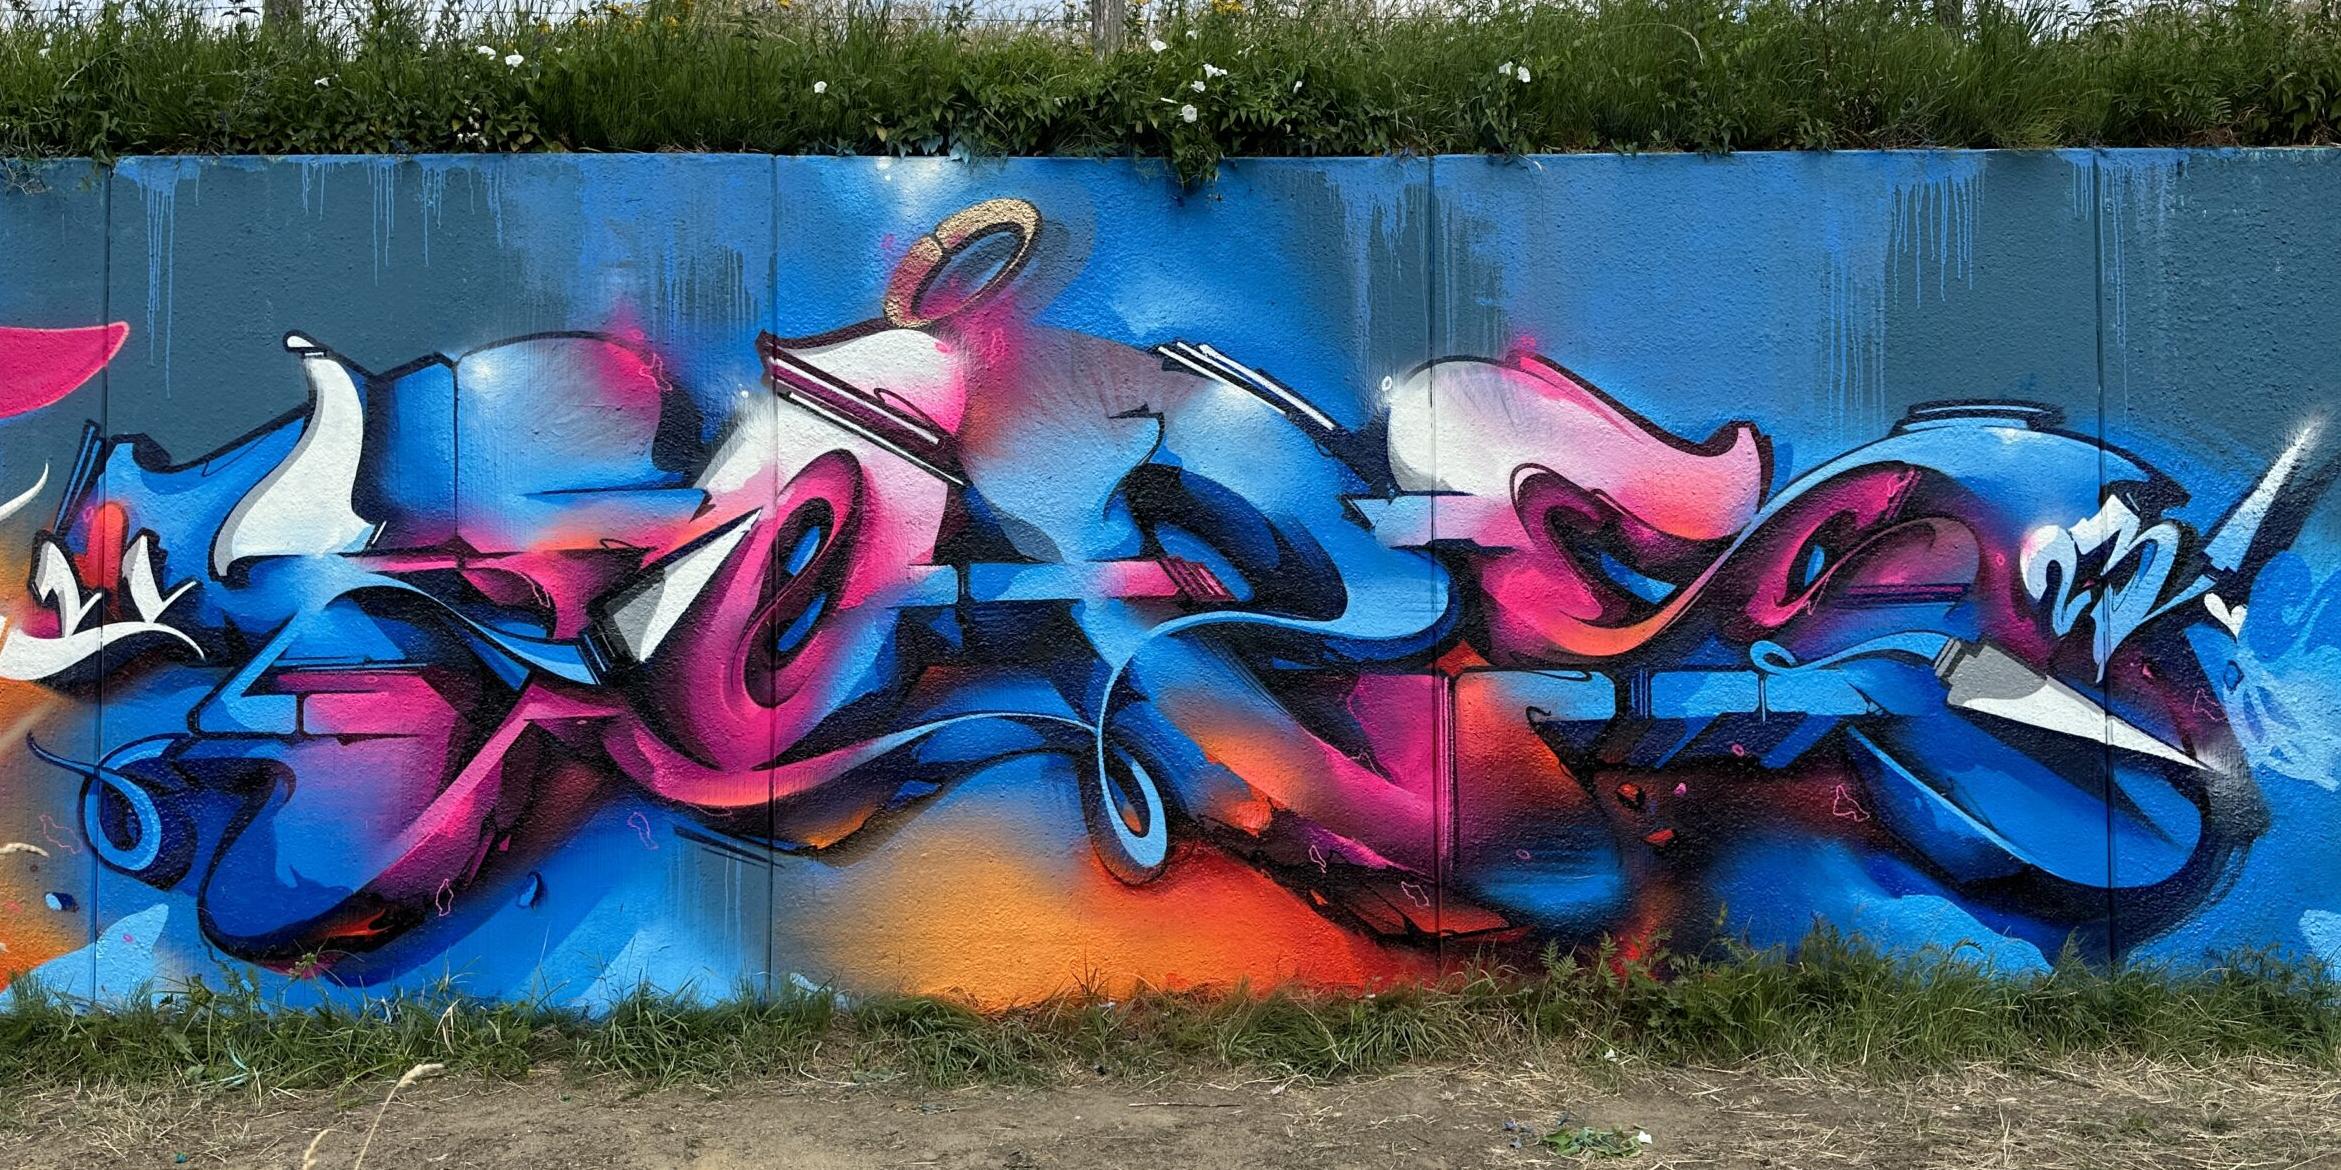 A work by Does - Geleen, the Netherlands_thumb